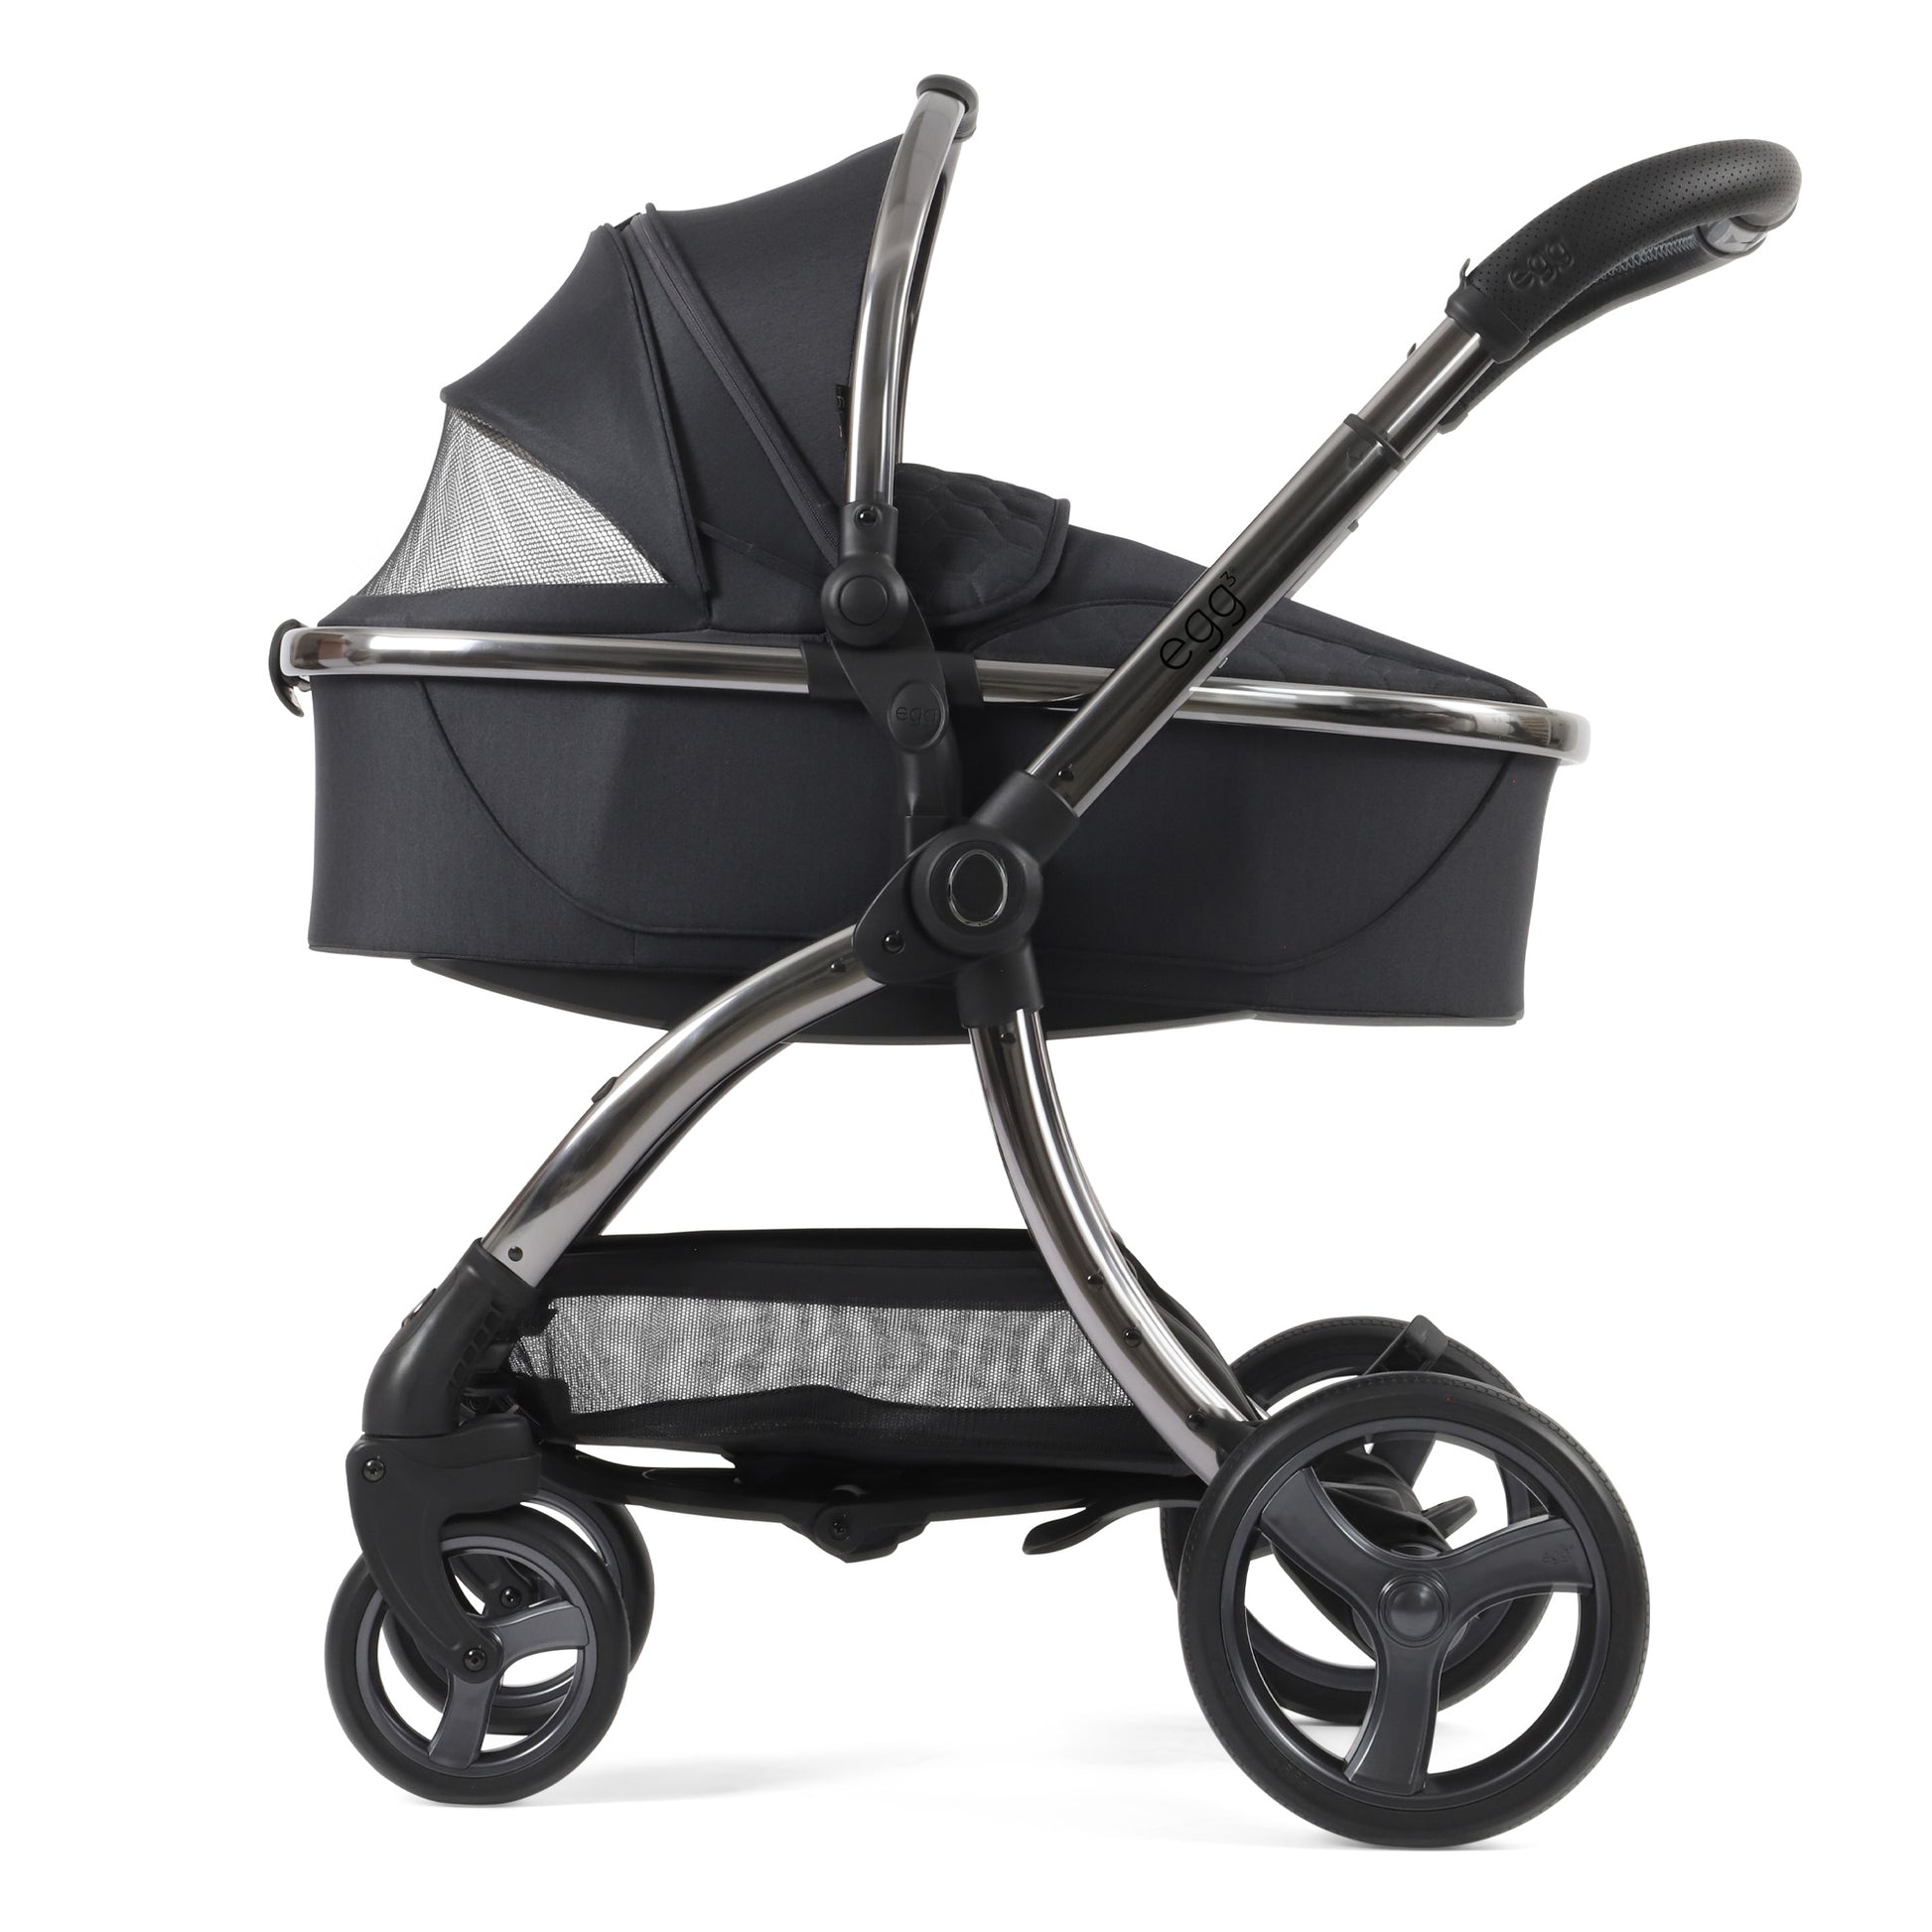 egg3® Carry Cot in Carbonite